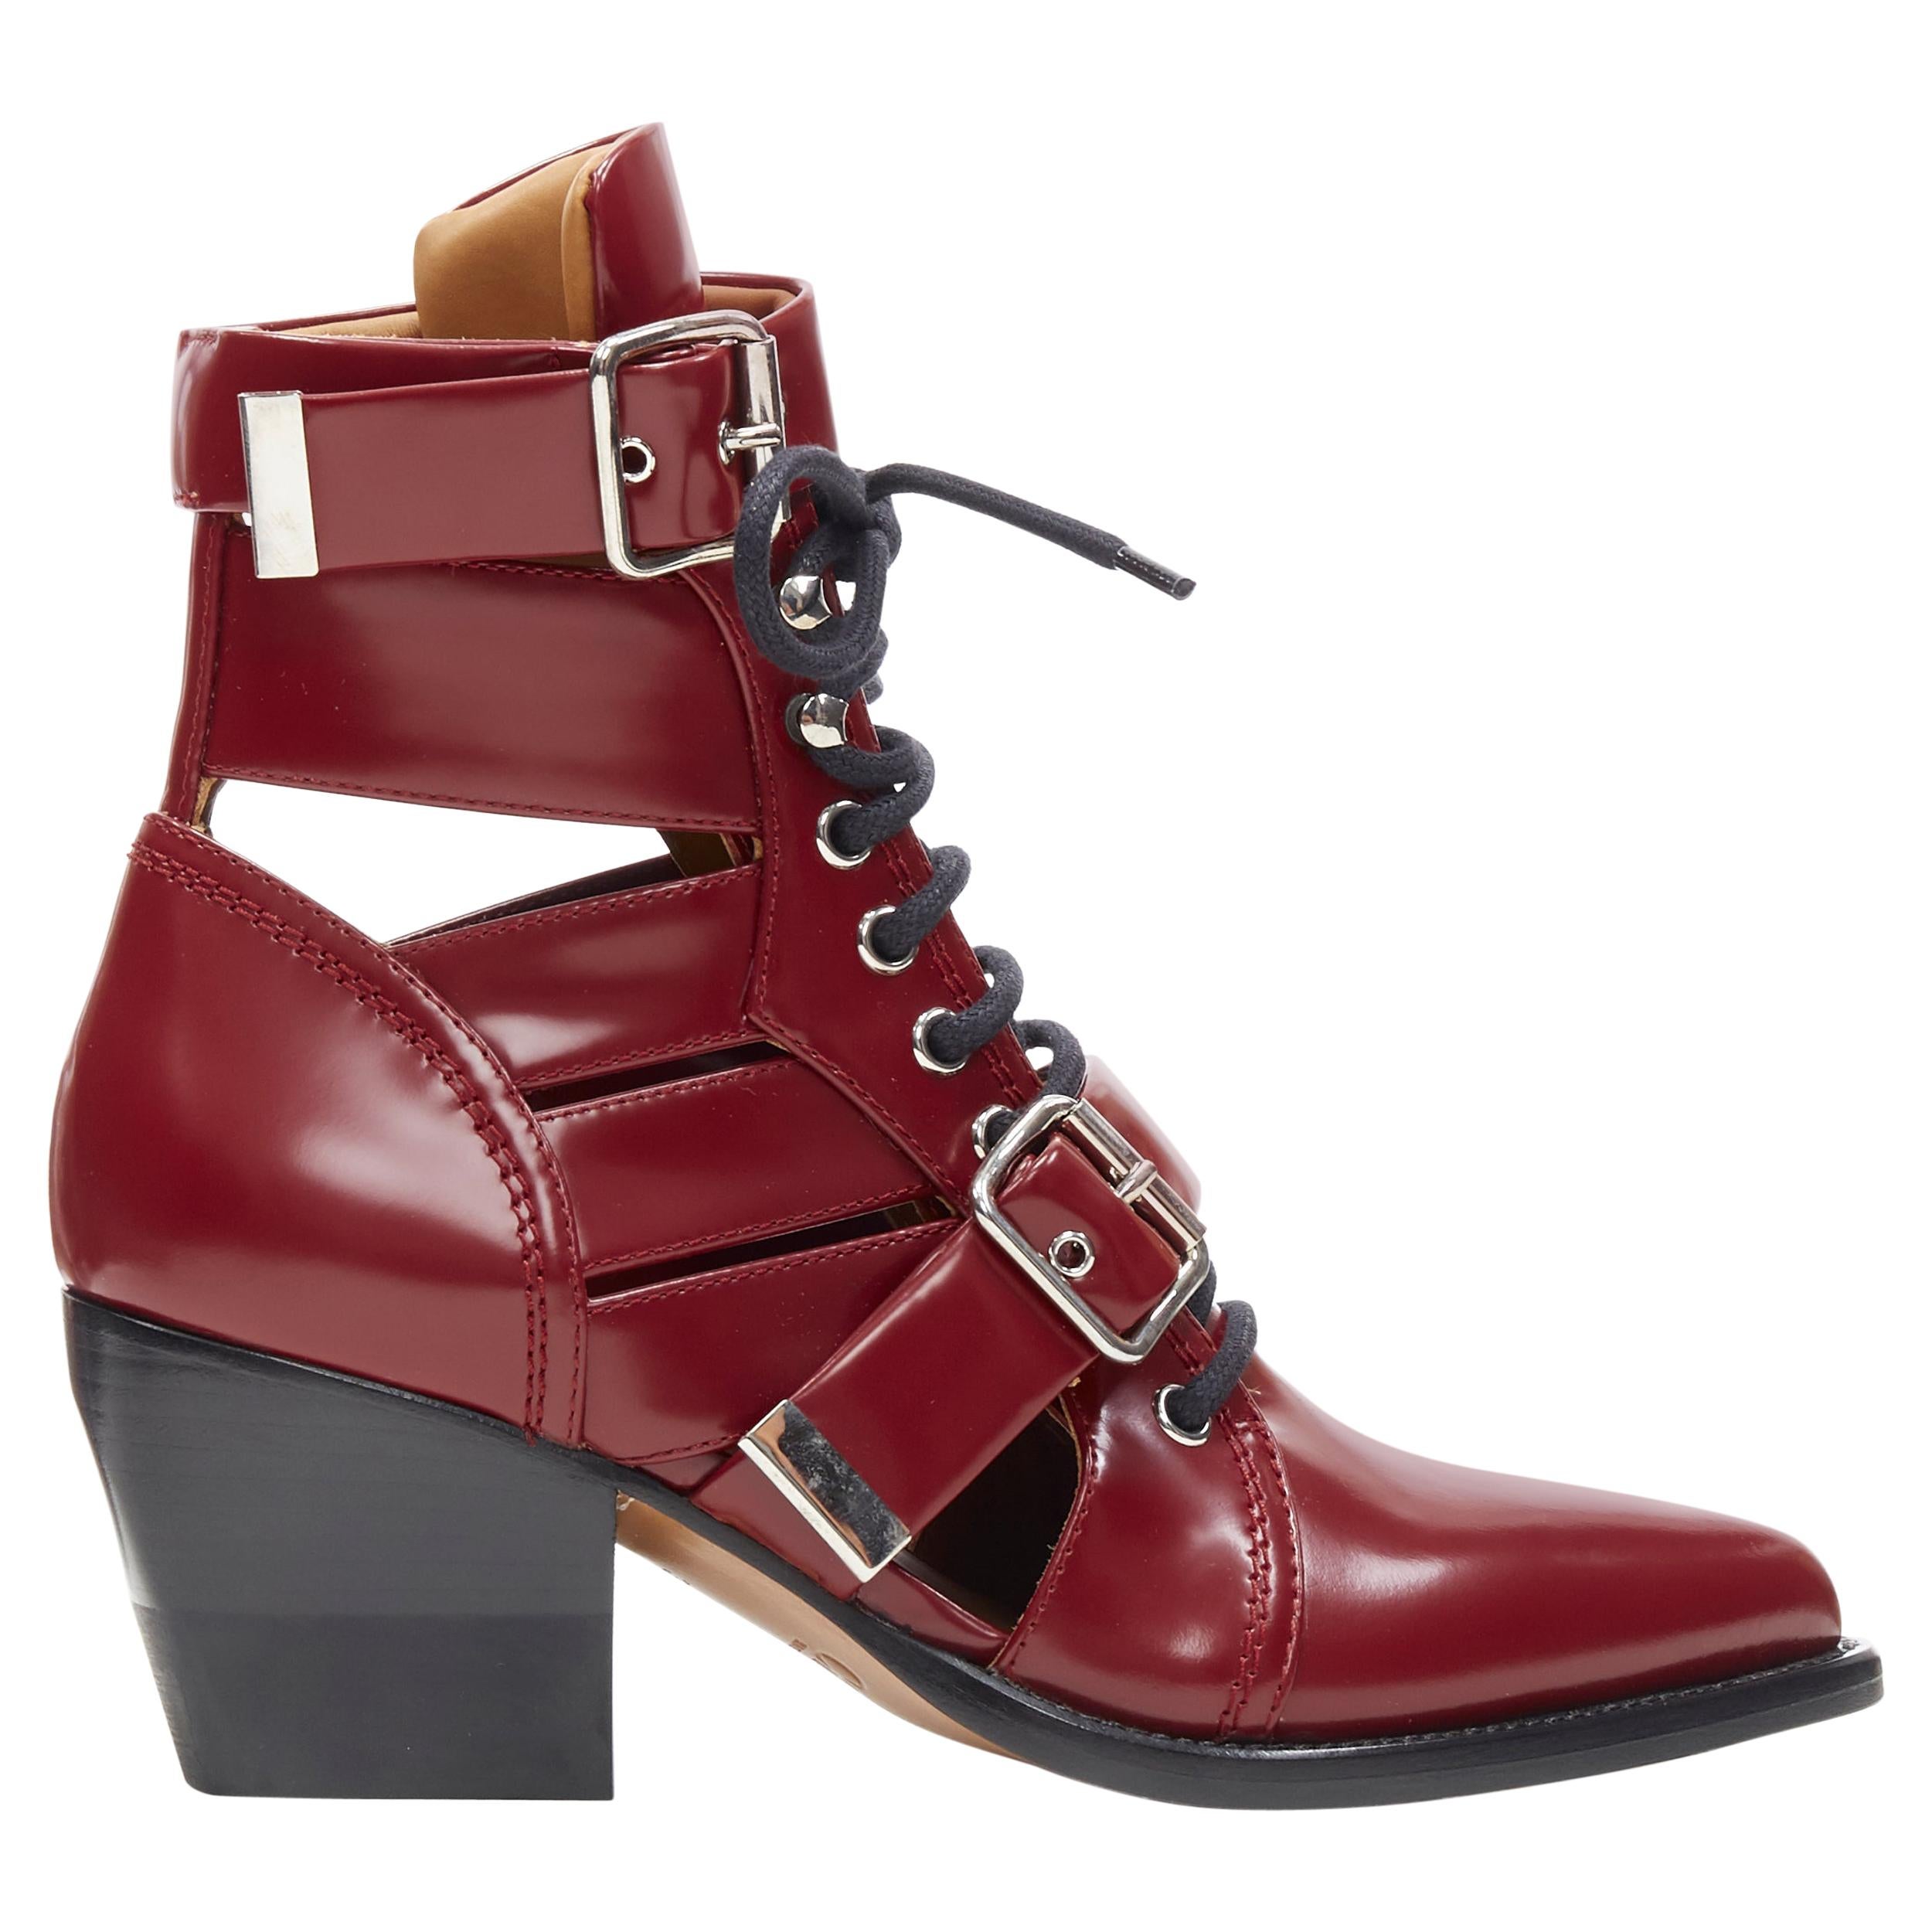 new CHLOE Rylee burgundy red leather cut out buckled pointy ankle boot EU39